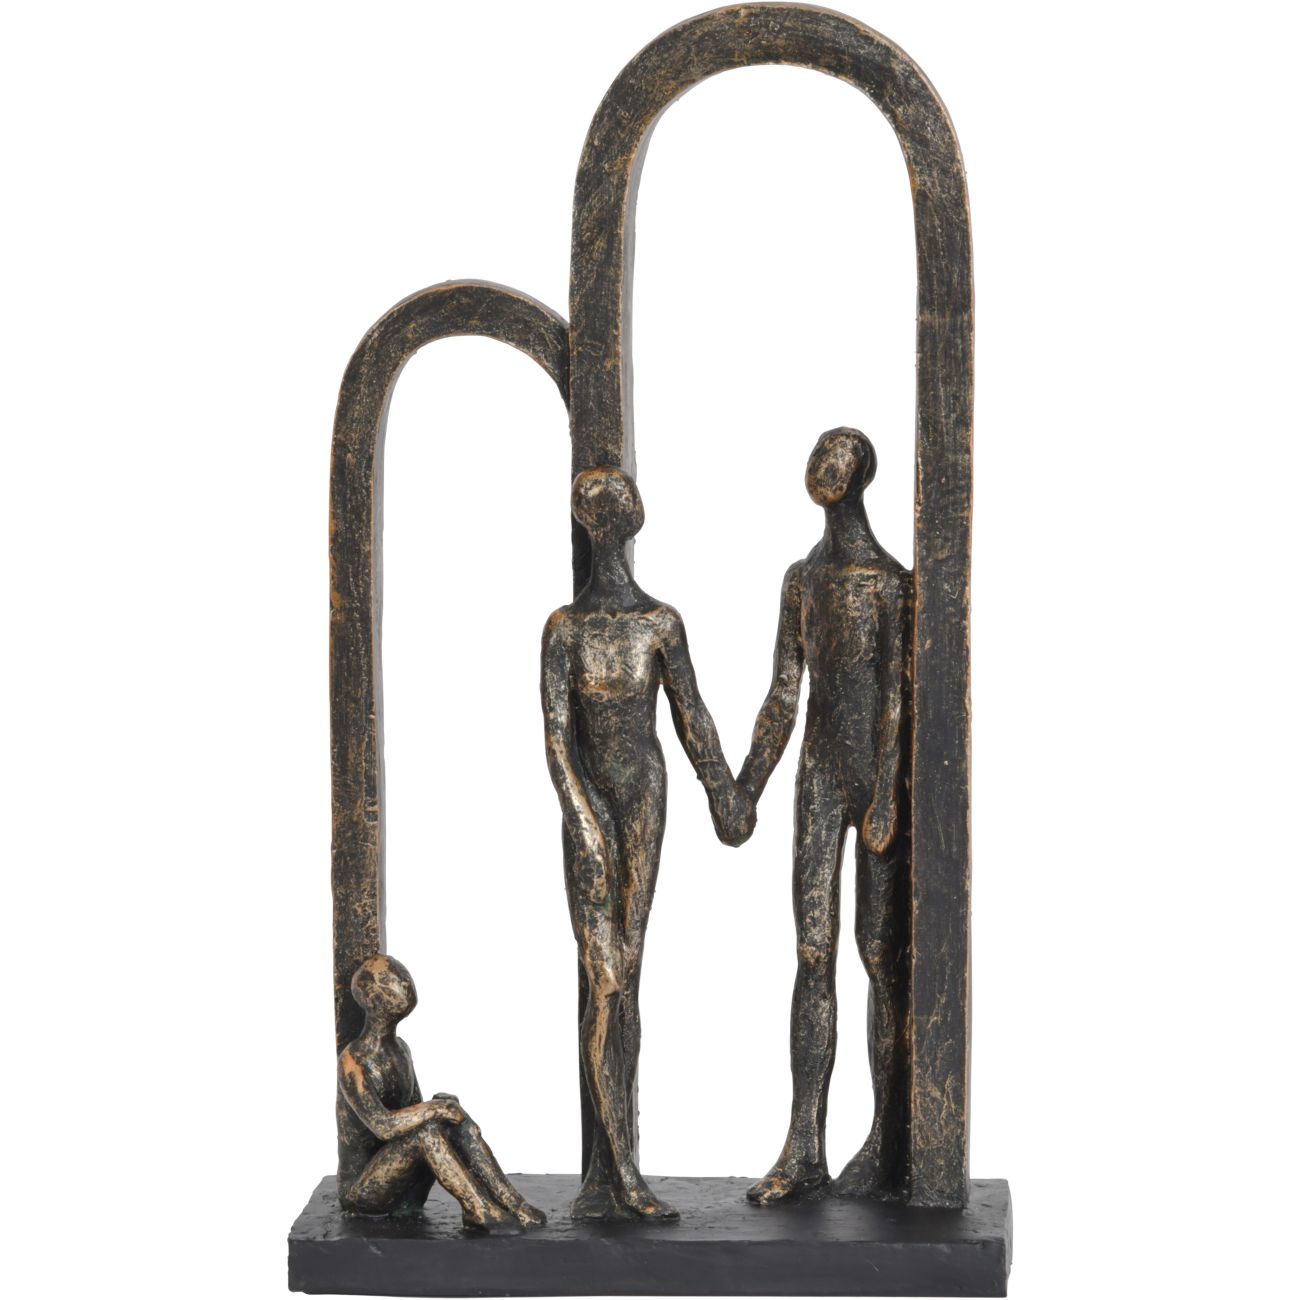 Antique Bronze Family in Arches Sculpture Small